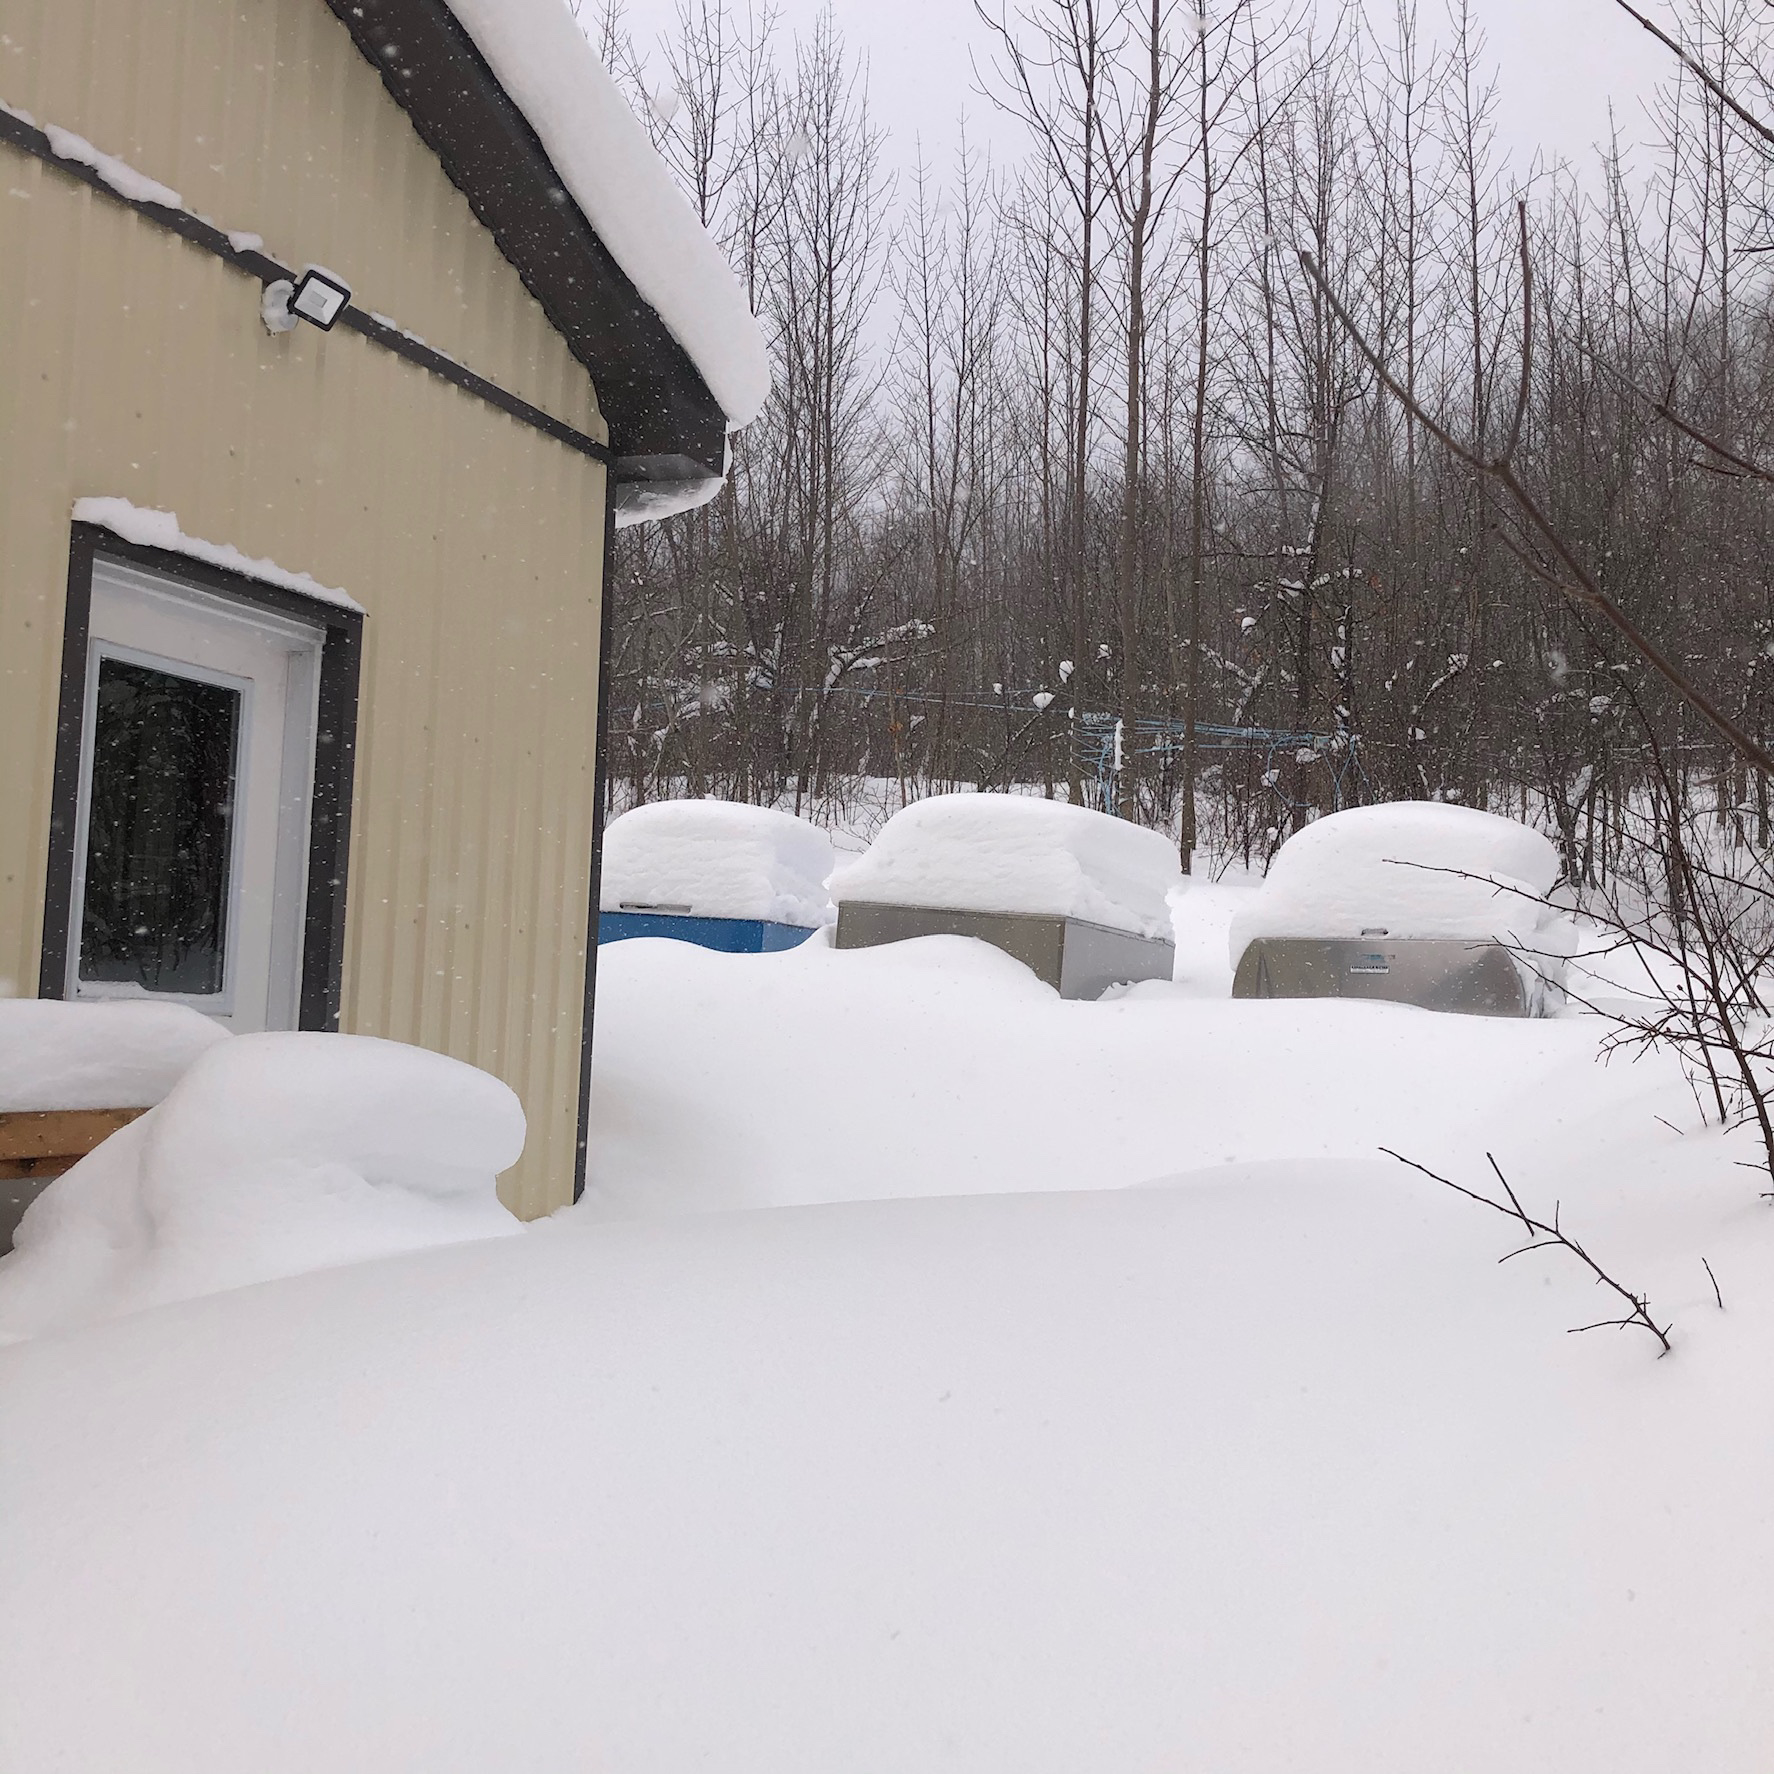 three metal tanks, covered in 60+cm of snow. there is a yellow building beside them.